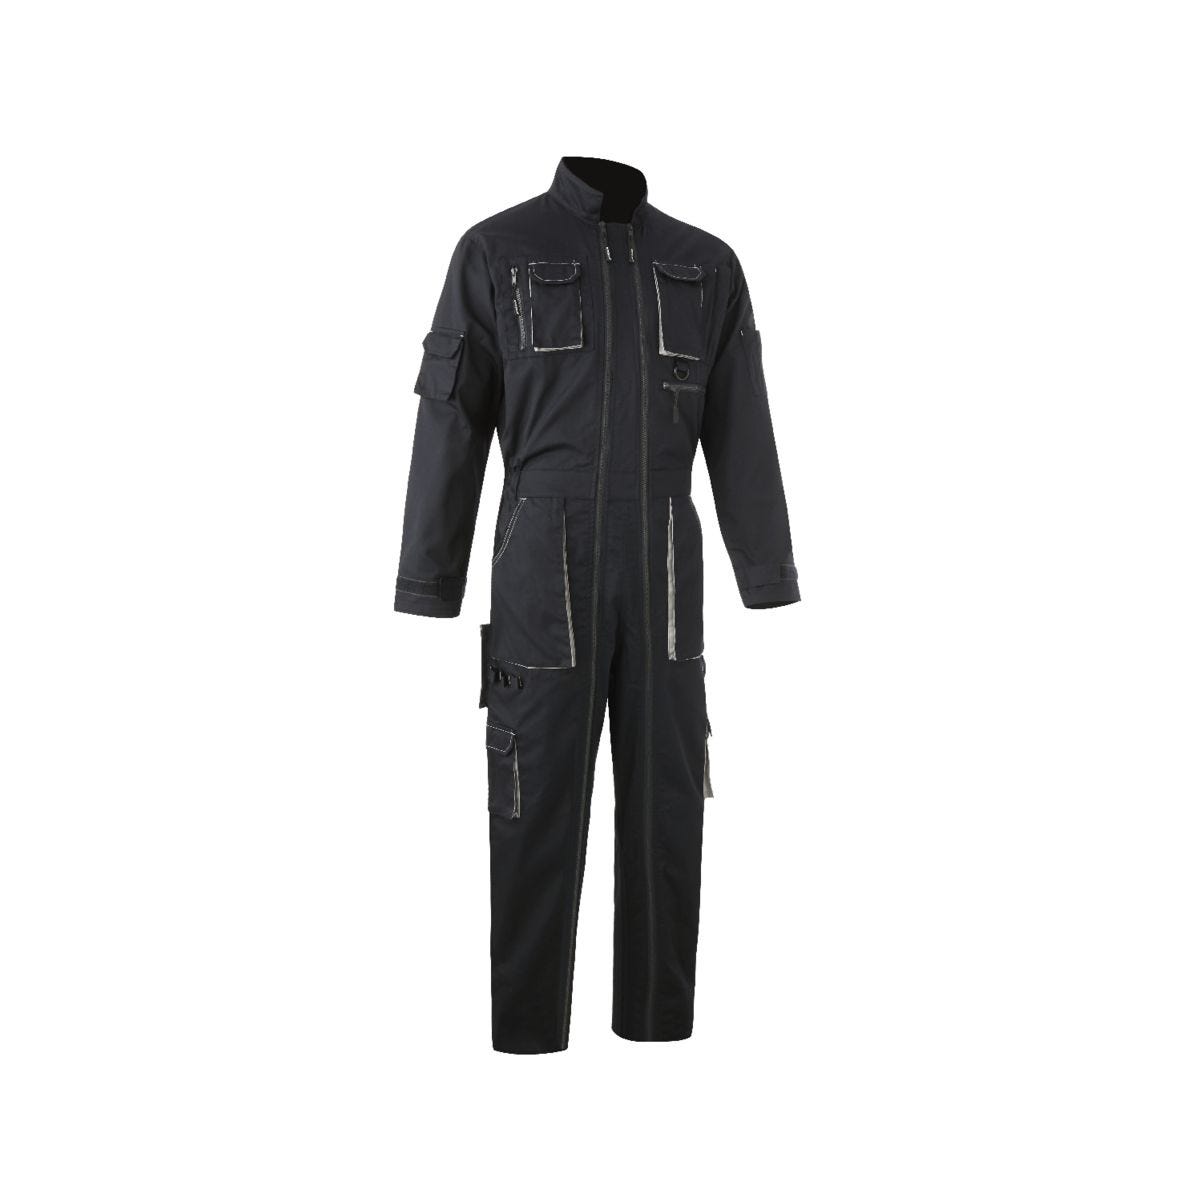 NAVY II Combinaison 2 zips, marine/gris, 60%CO/40%PES, 245g/m² - COVERGUARD - Taille M 0